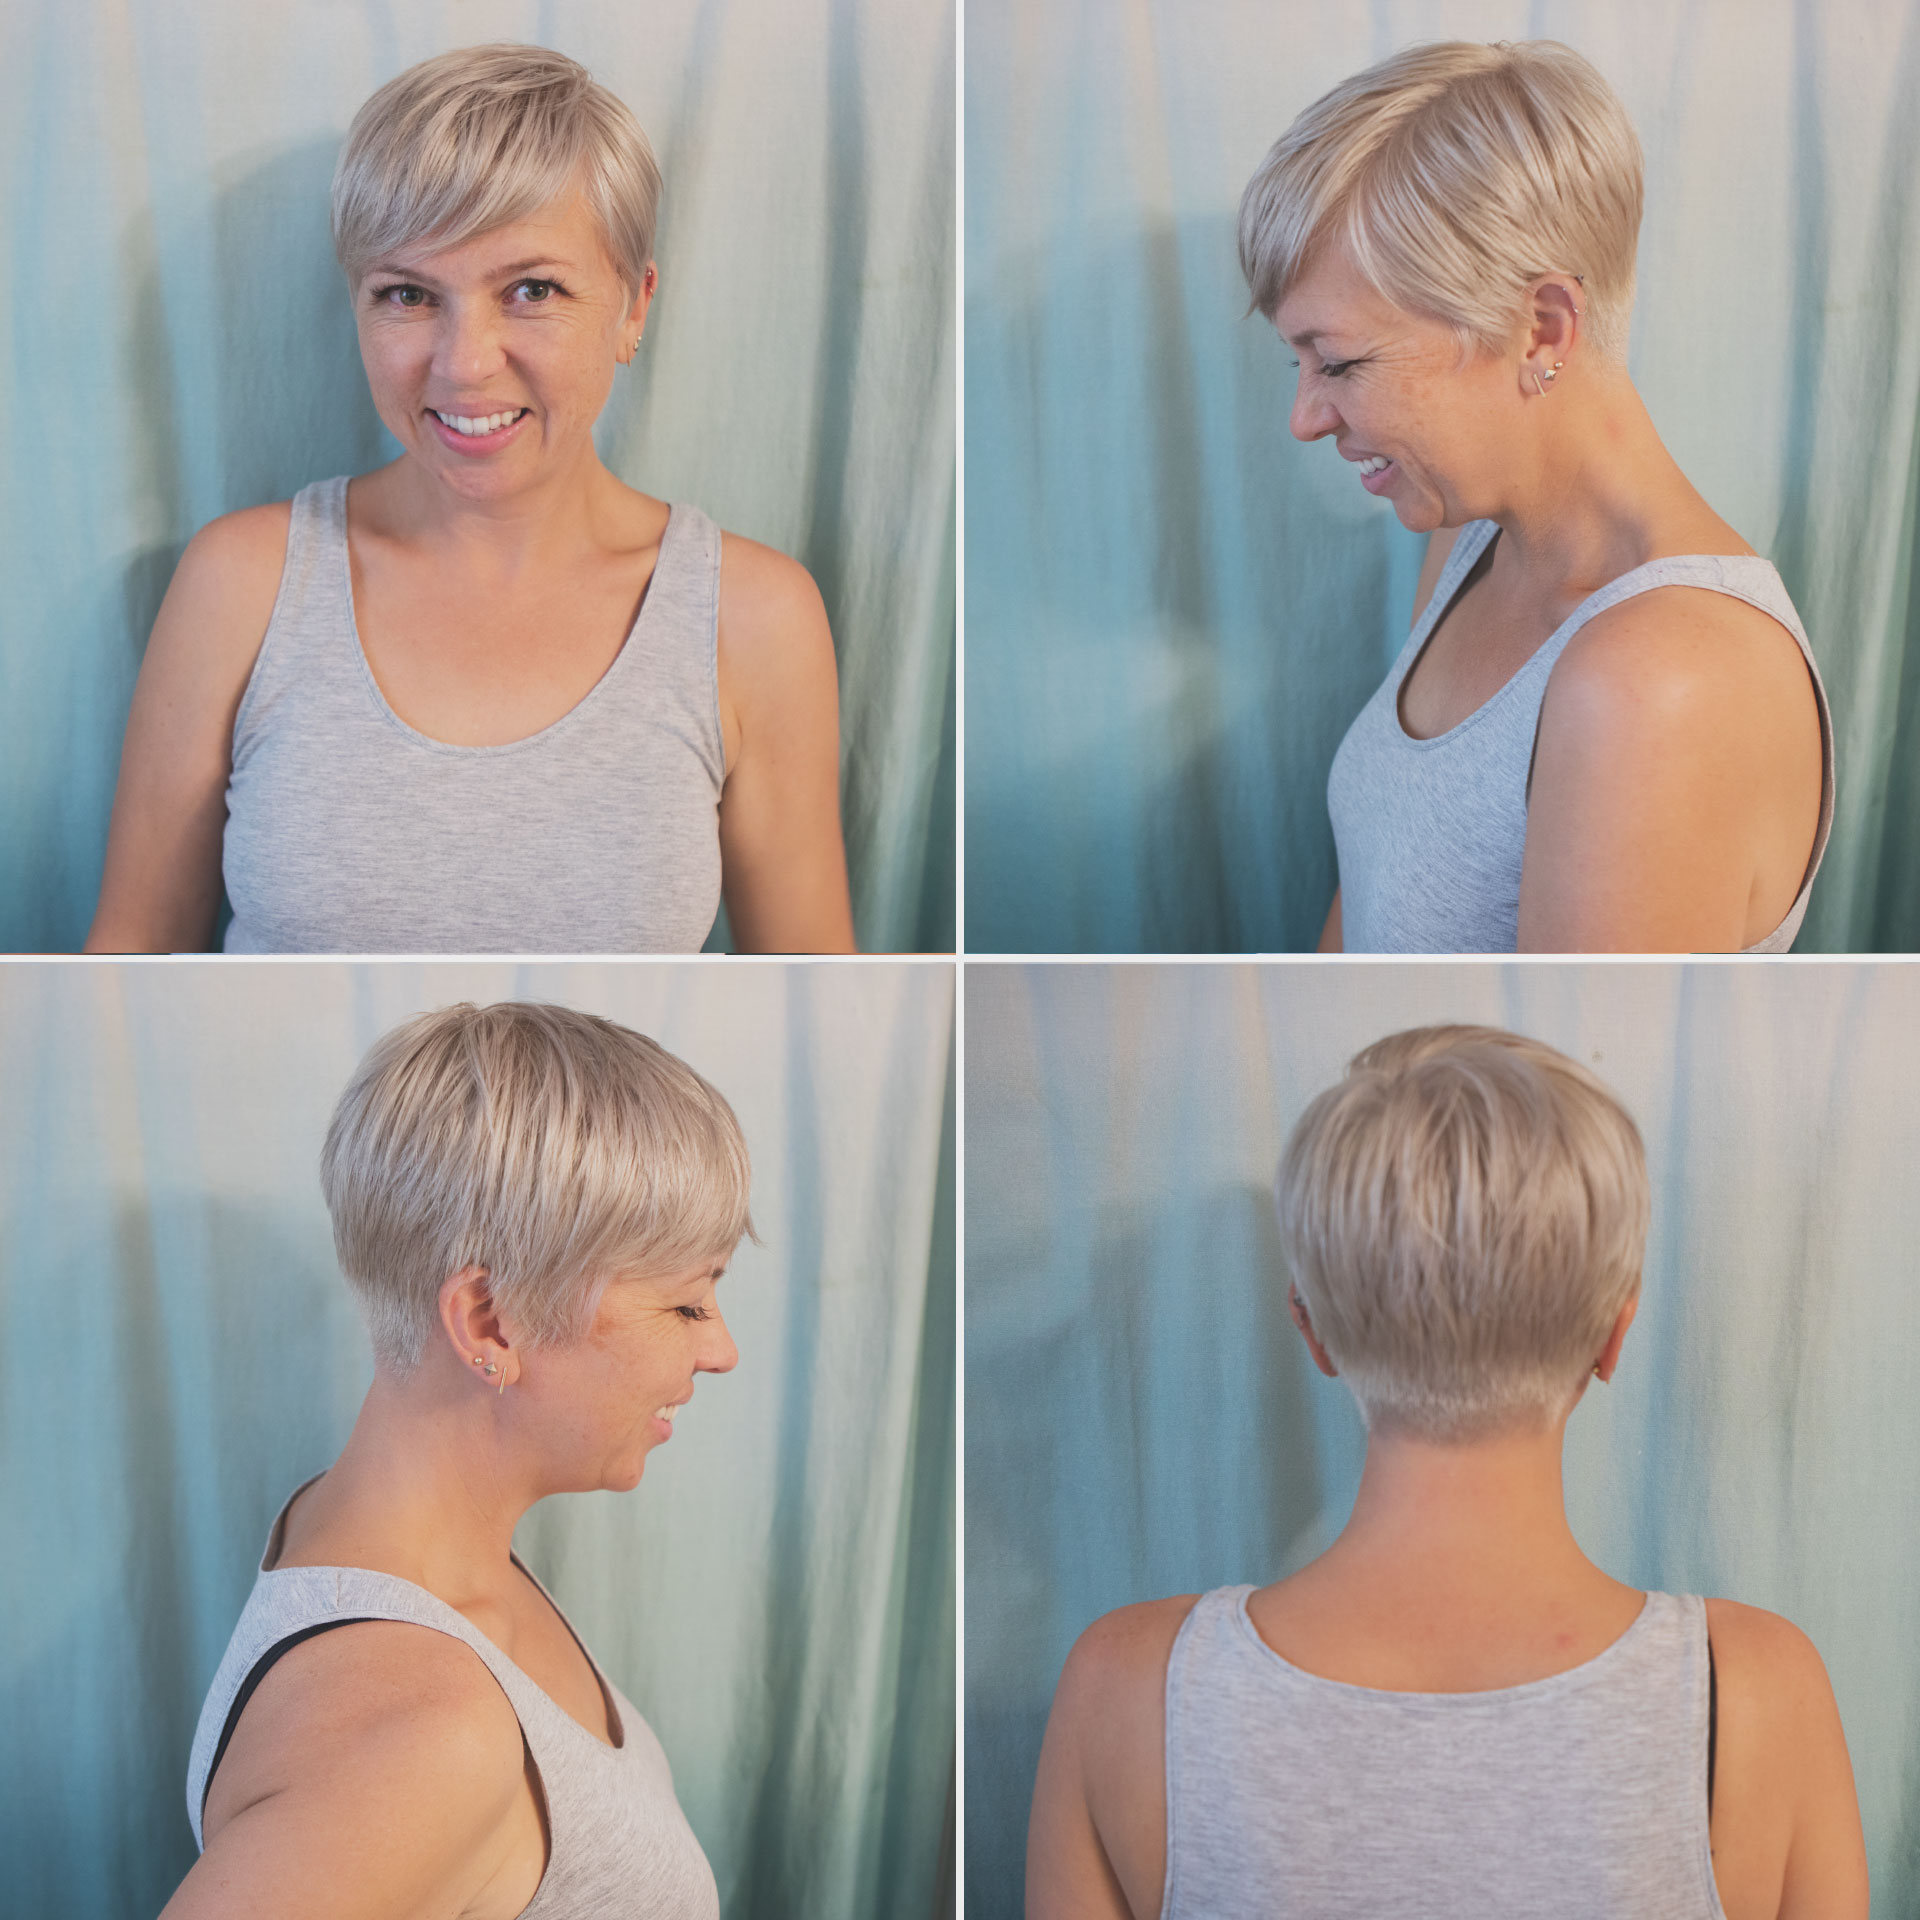 short blonde hair care, hairstory, new wash, amika bust your brass, blonde hair, pixie, pixie 360, short hair